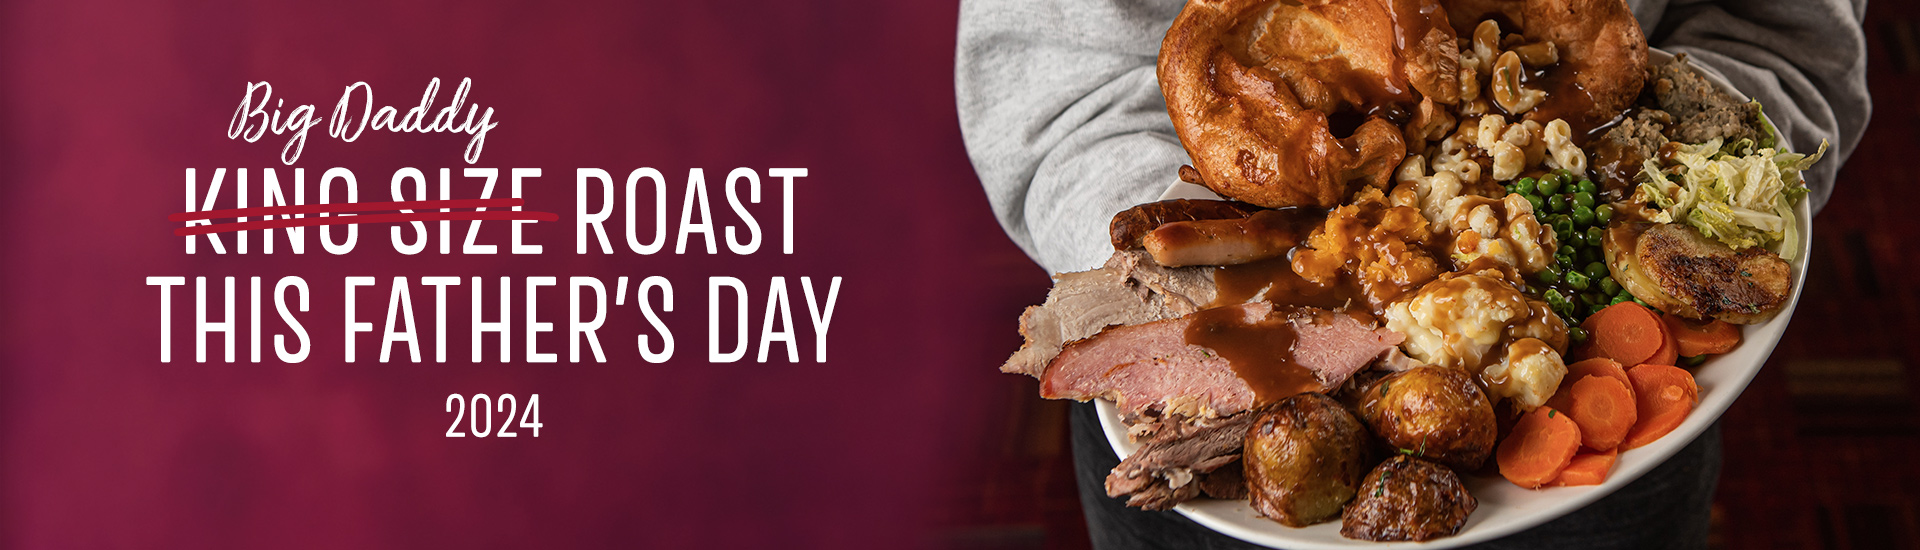 Father’s day at Toby Carvery